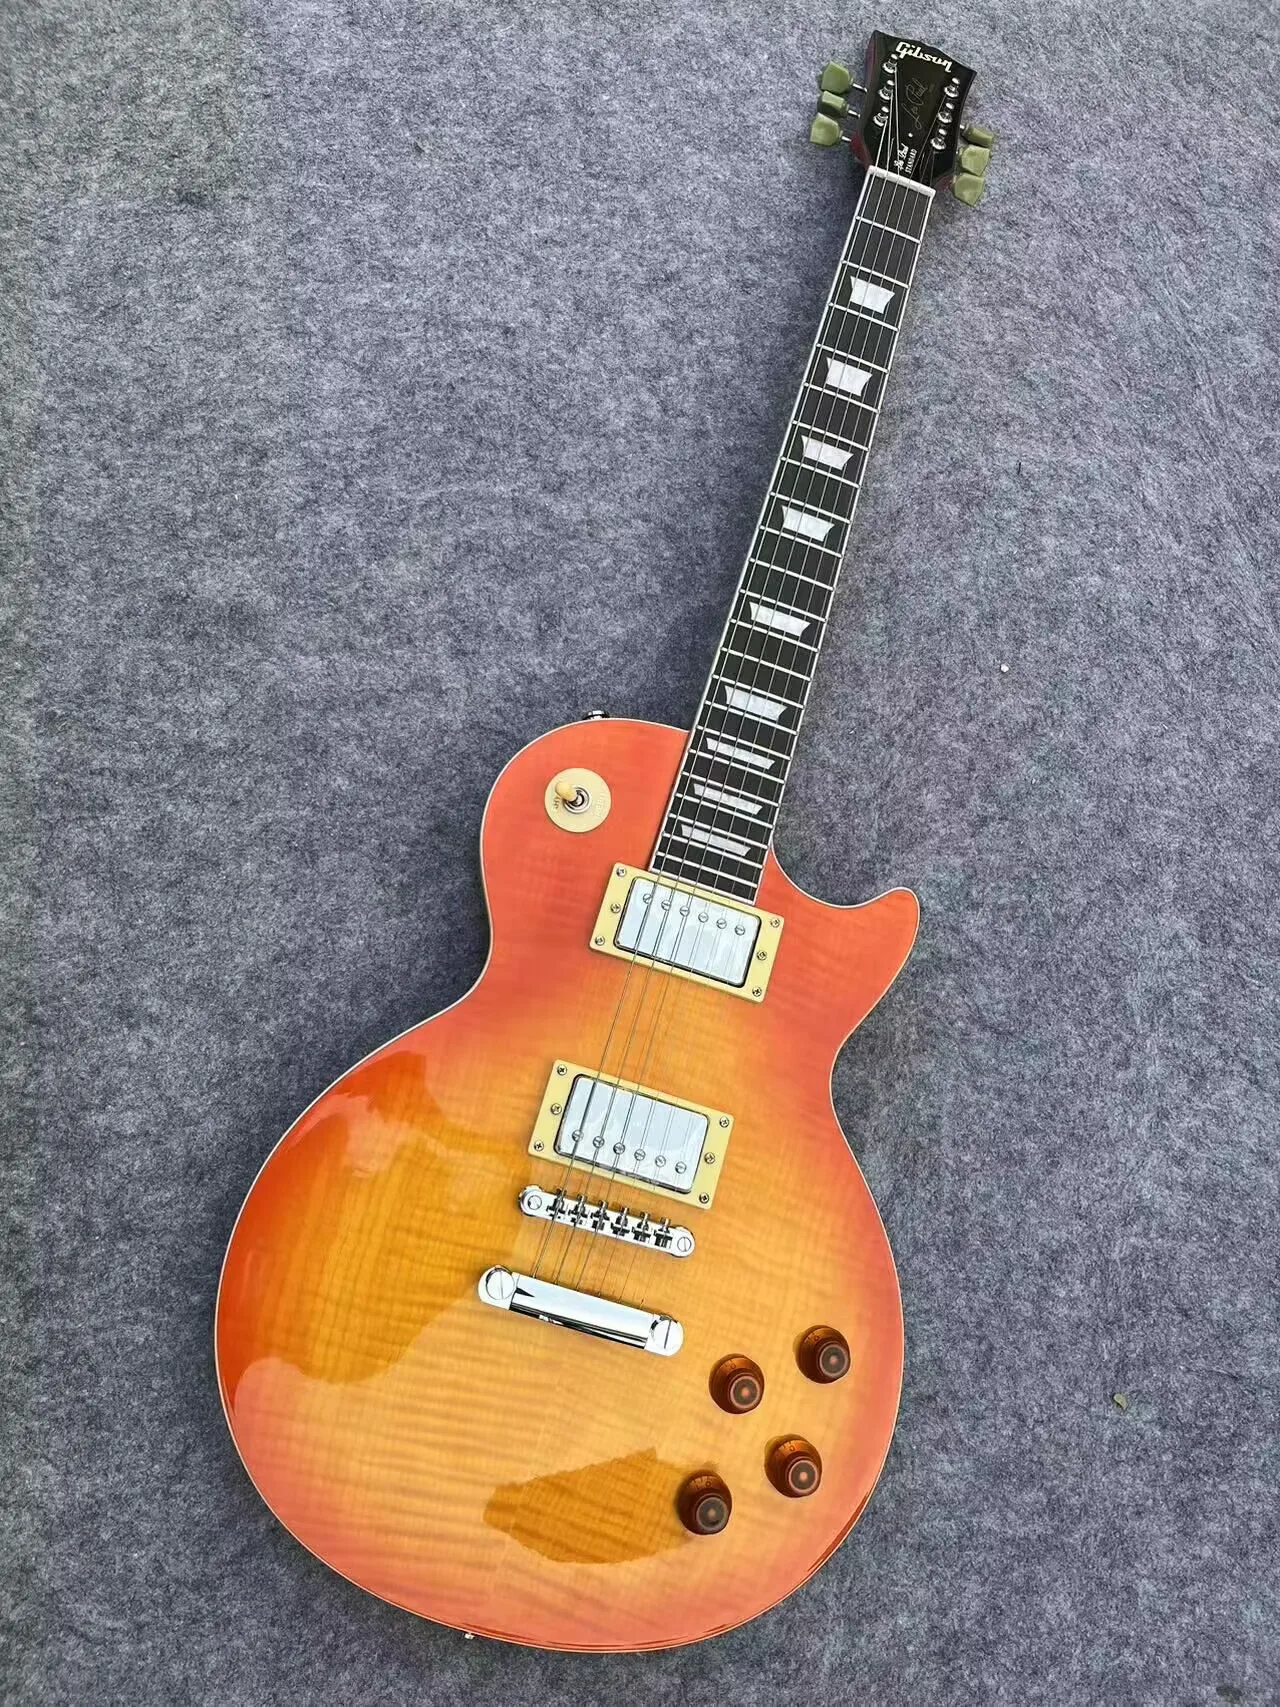 

Send in 3 days Flame Maple Top G Les Standard Brown LP Paul Electric Guitar in stock DFSHHS